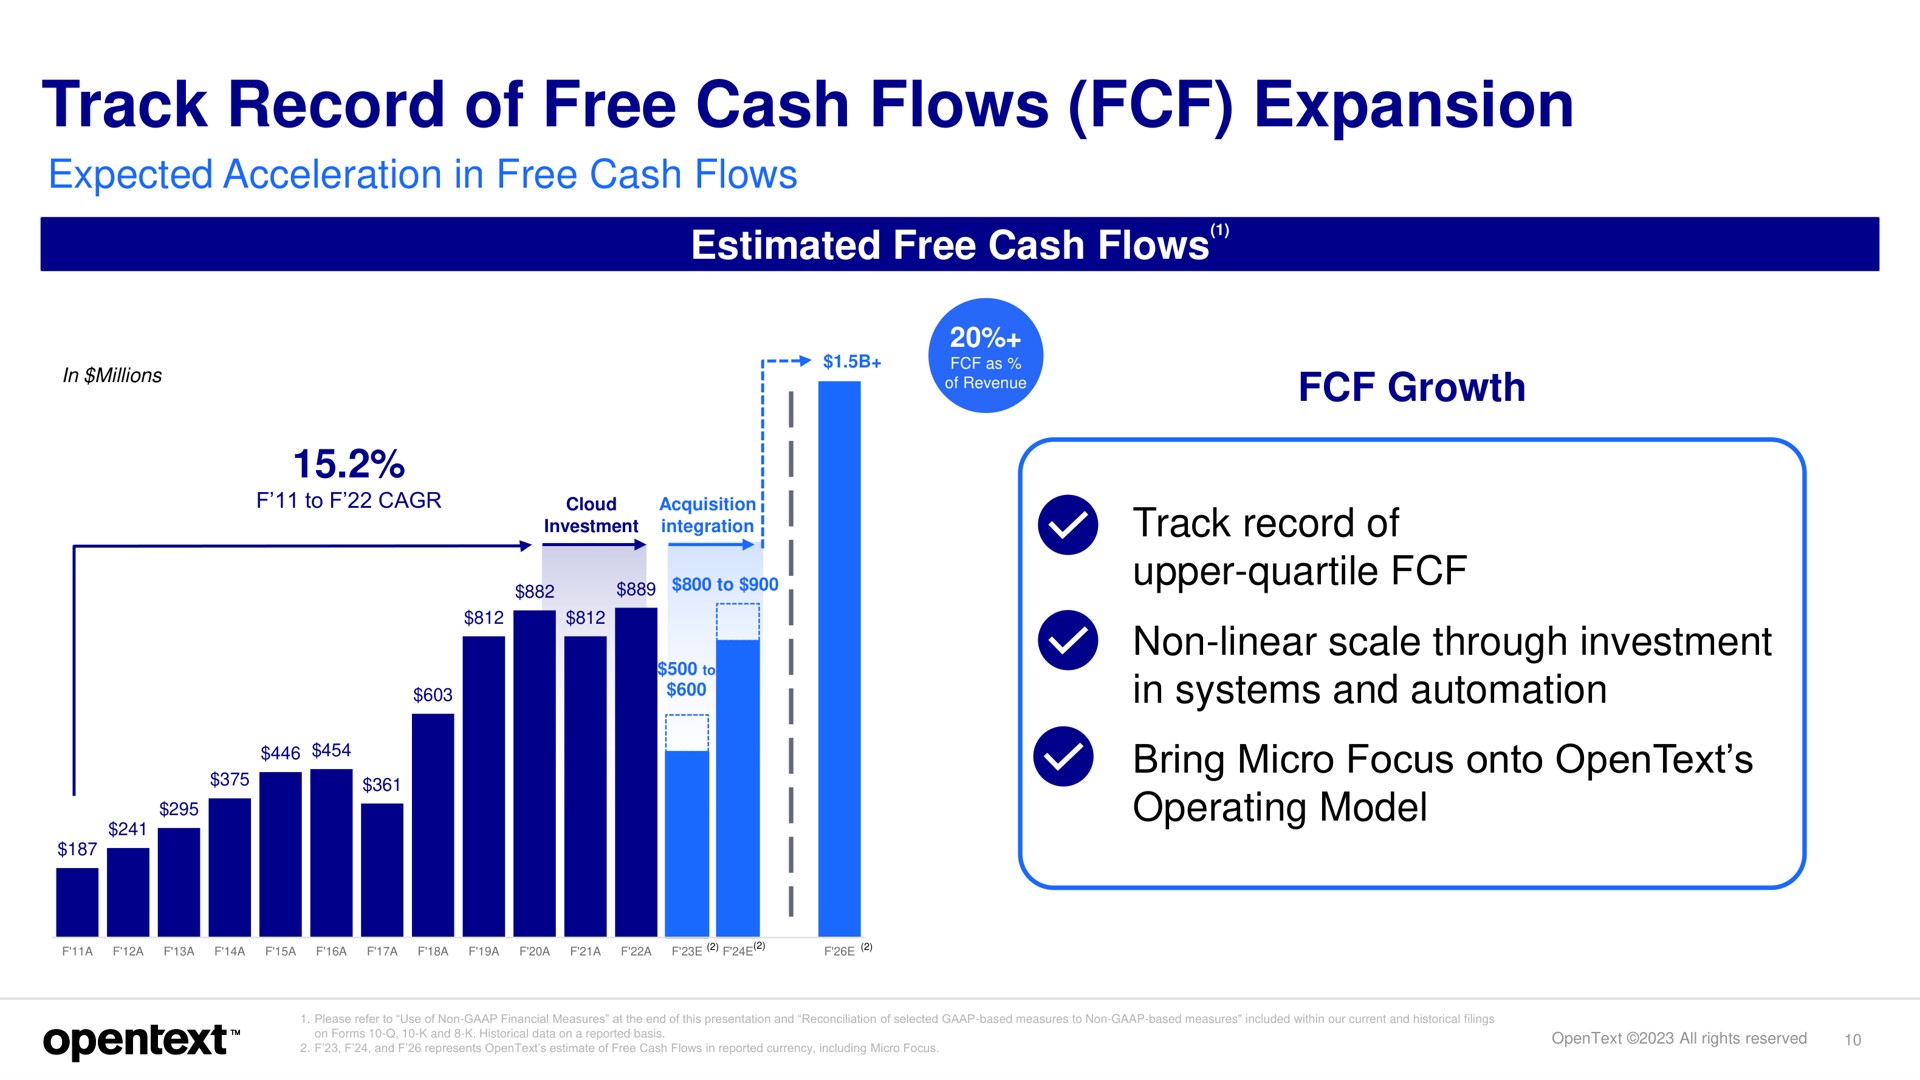 track record of free cash flows expansion i | OpenText